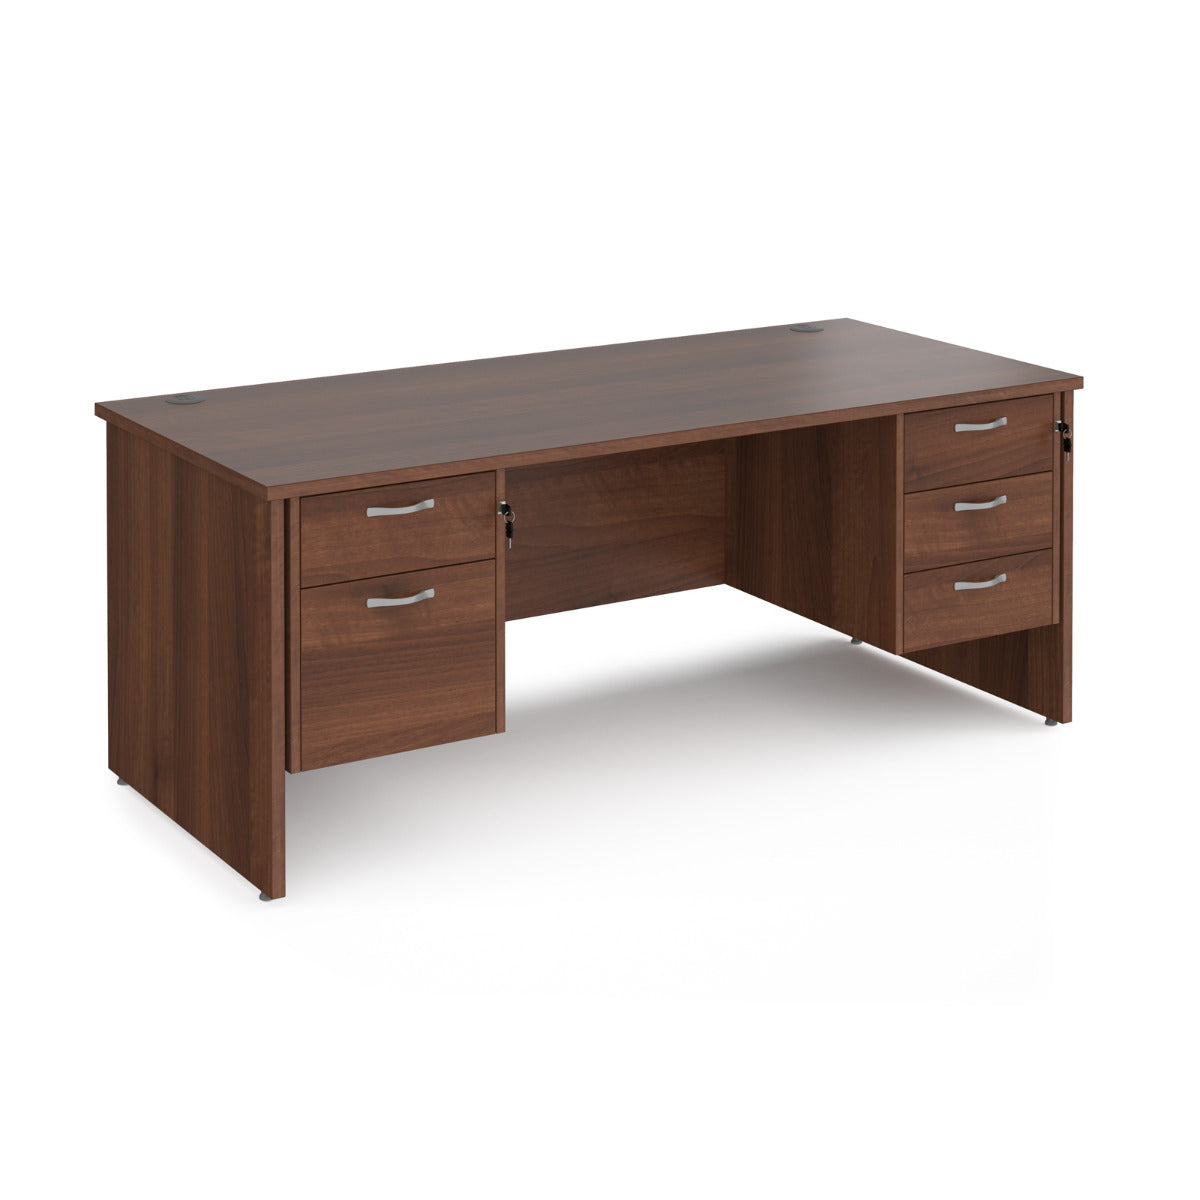 Maestro 800mm Deep Straight Panel Leg Office Desk with Two and Three Drawer Pedestal